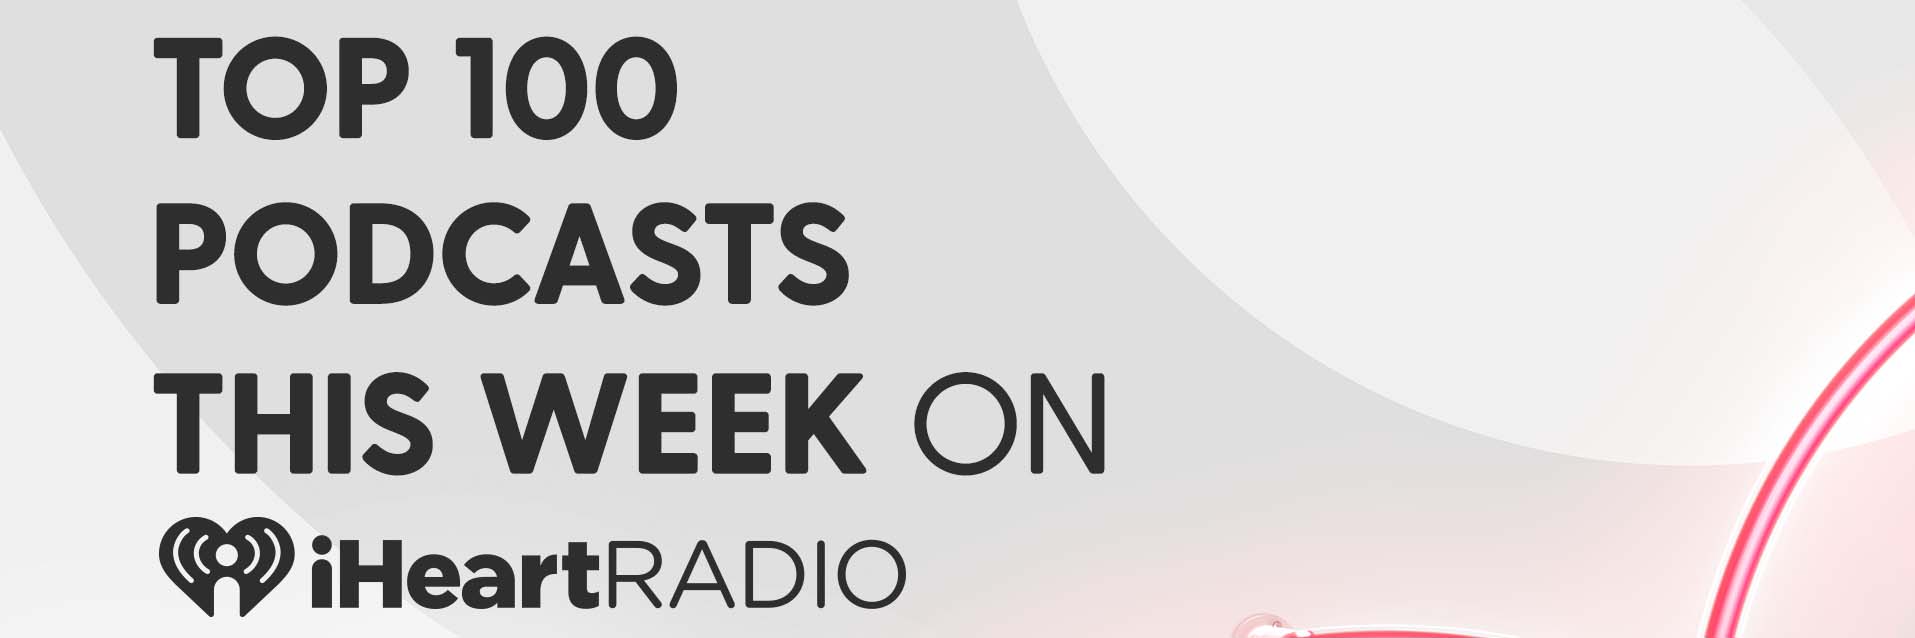 Top Charts Podcast